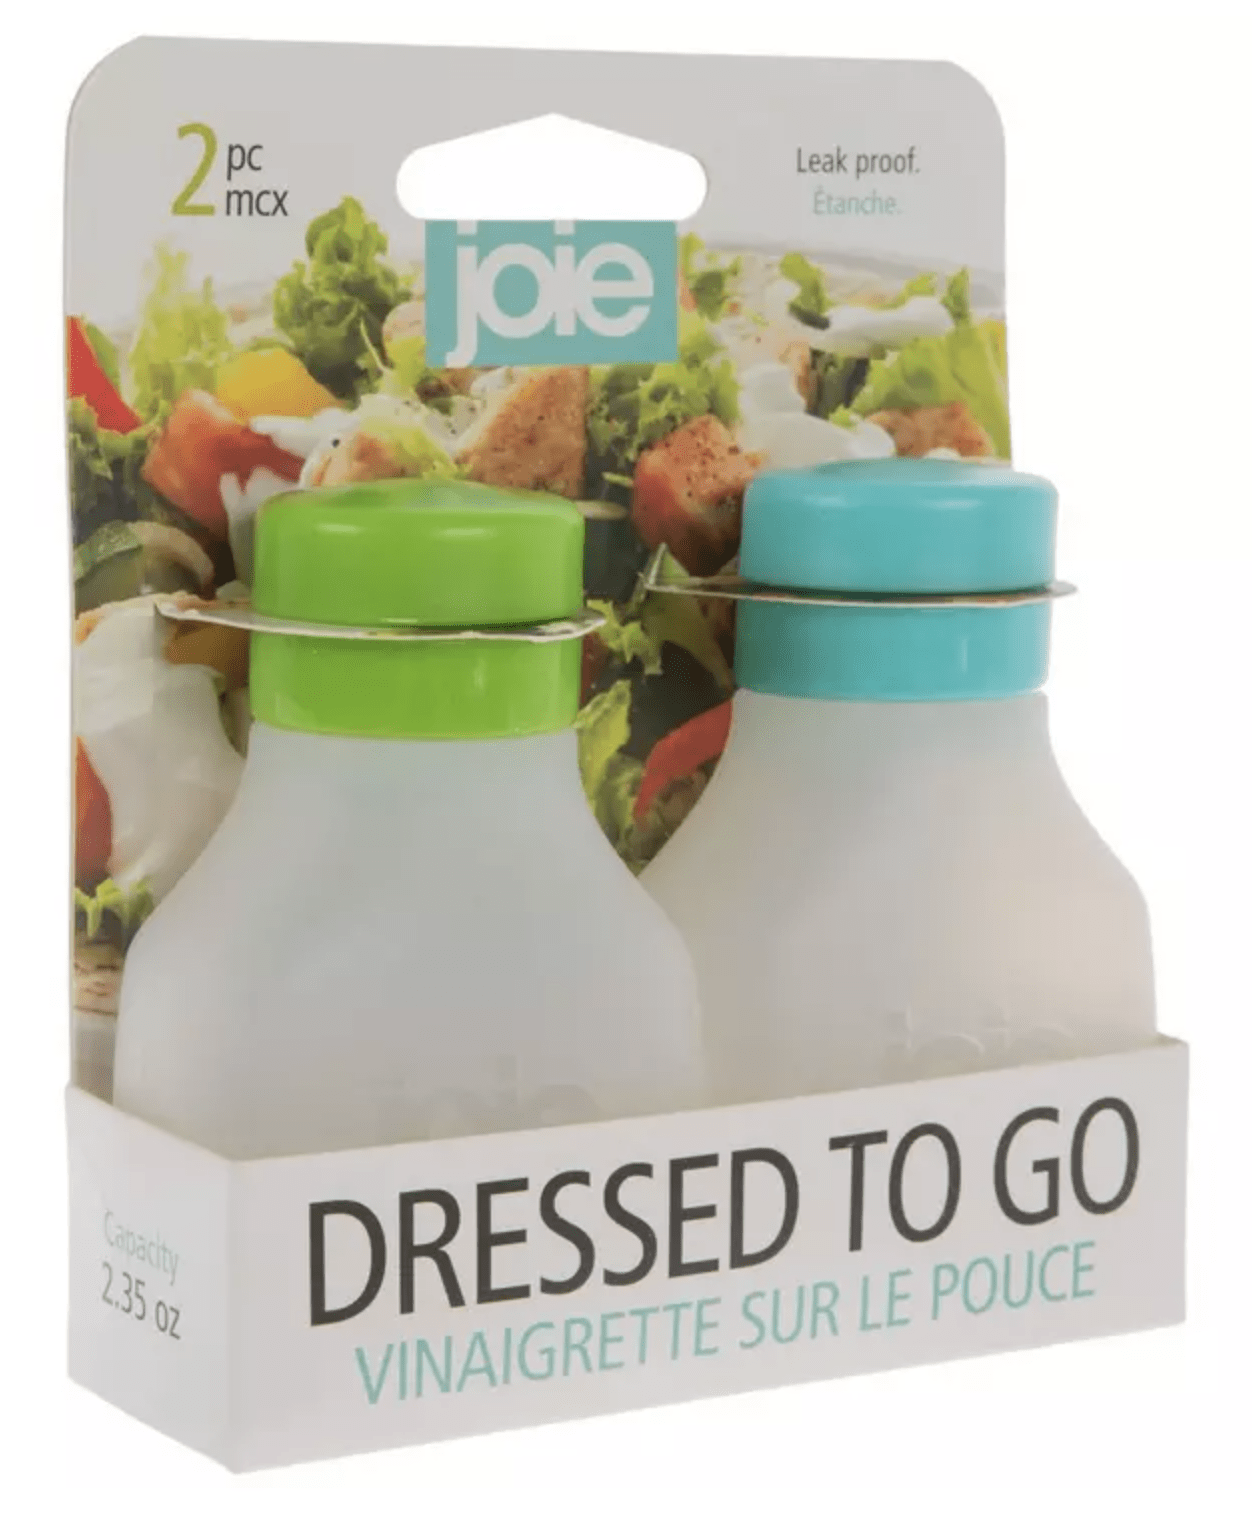 salad dressing meal prep containers